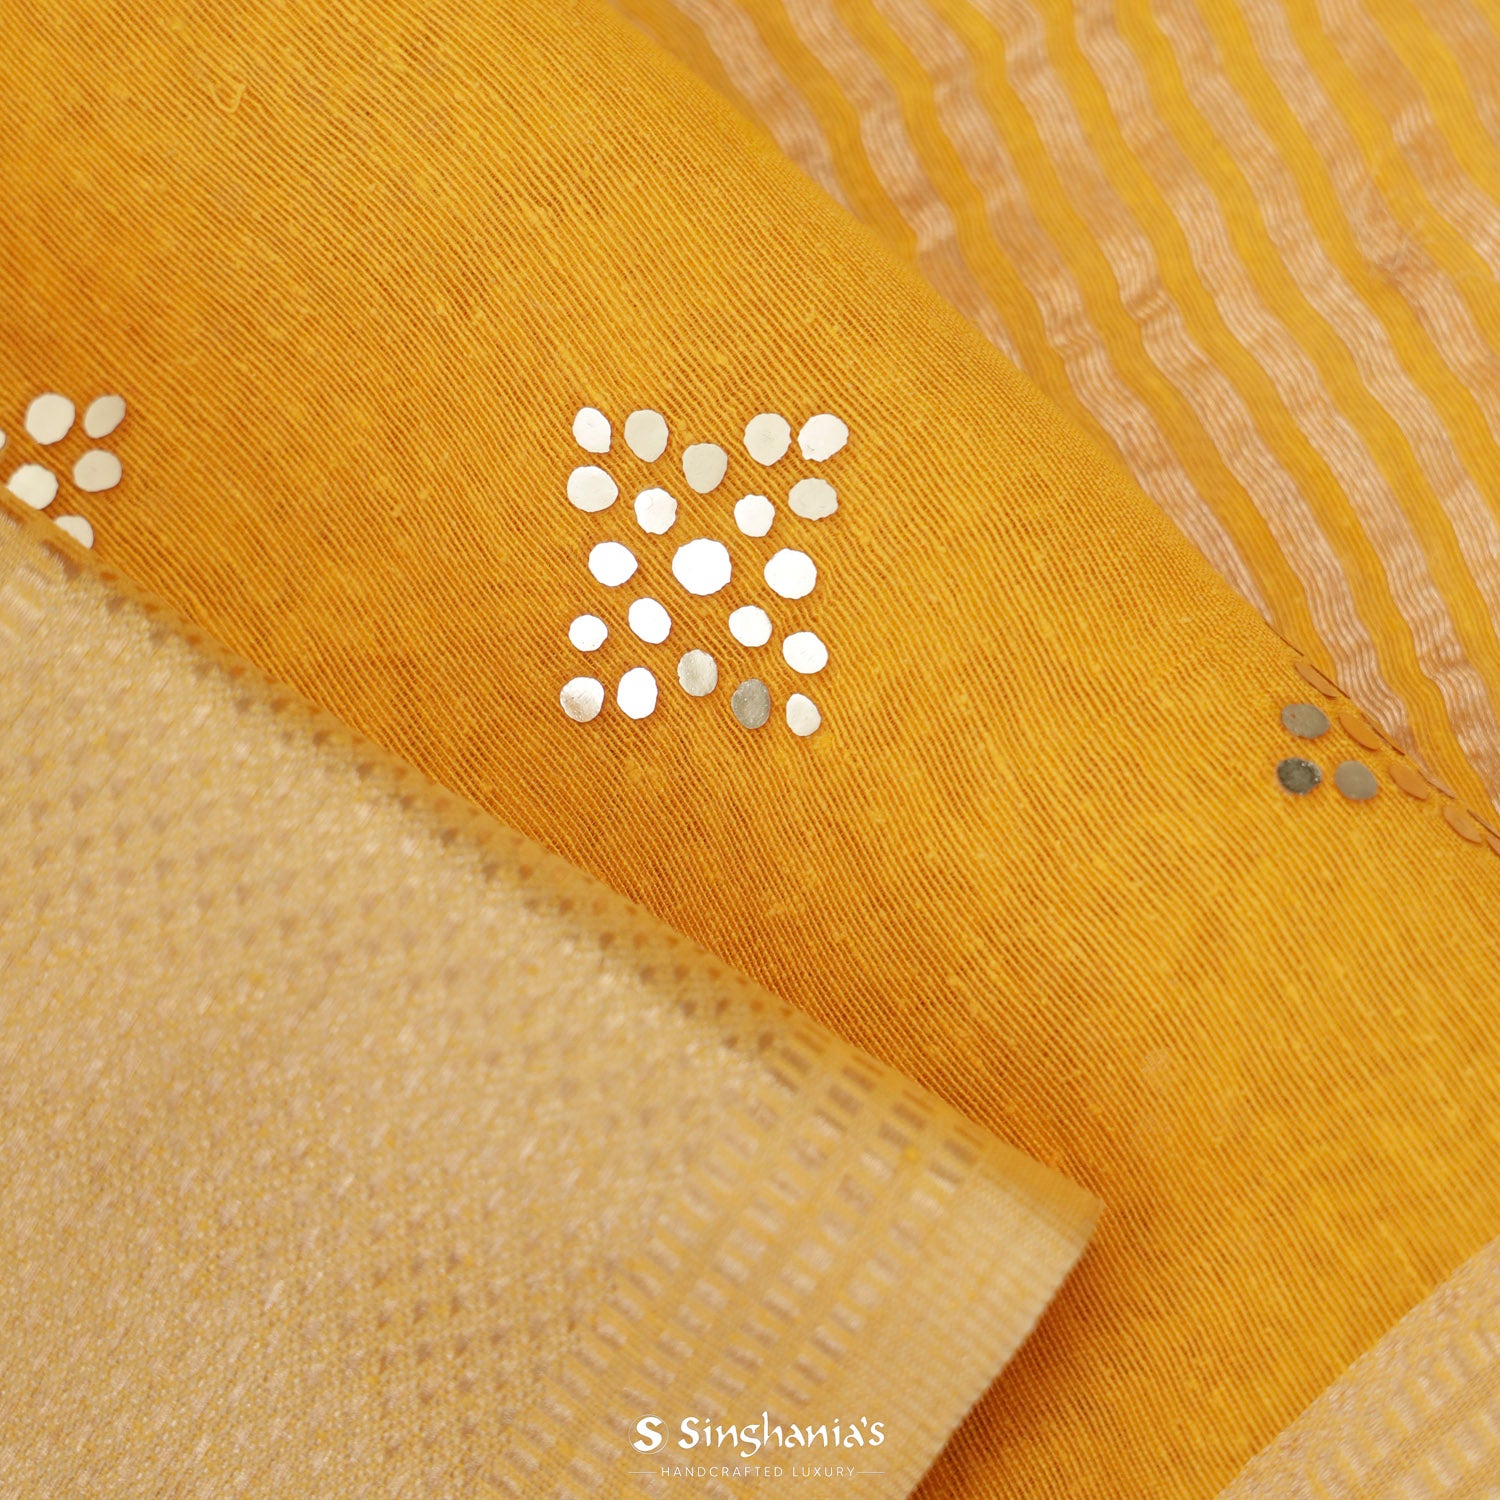 Amber Yellow Linen Saree With Mukaish Work In Floral Motifs